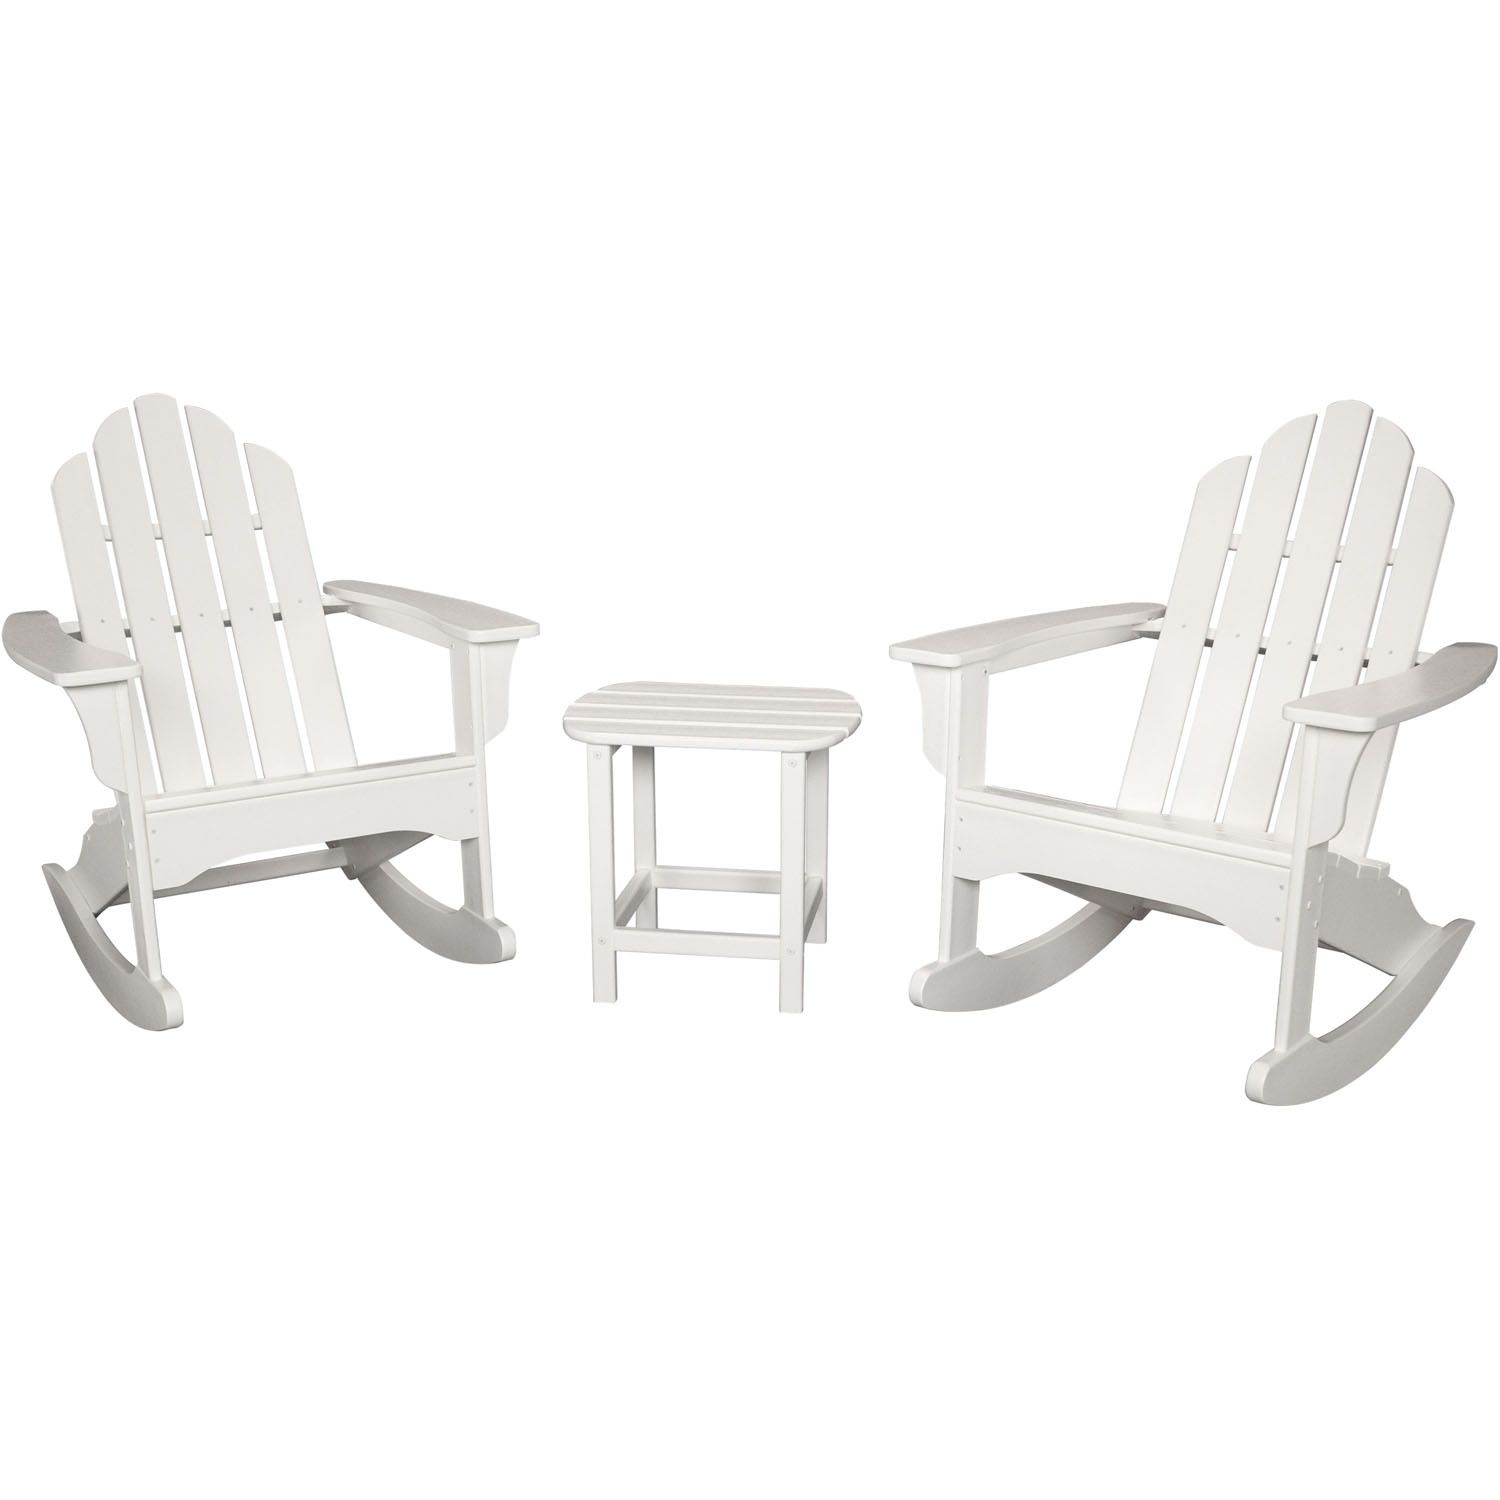 Image for Hanover Accessories All-Weather Rocking Adirondack Patio Chair & End Table 3-piece Set at Kohl's.